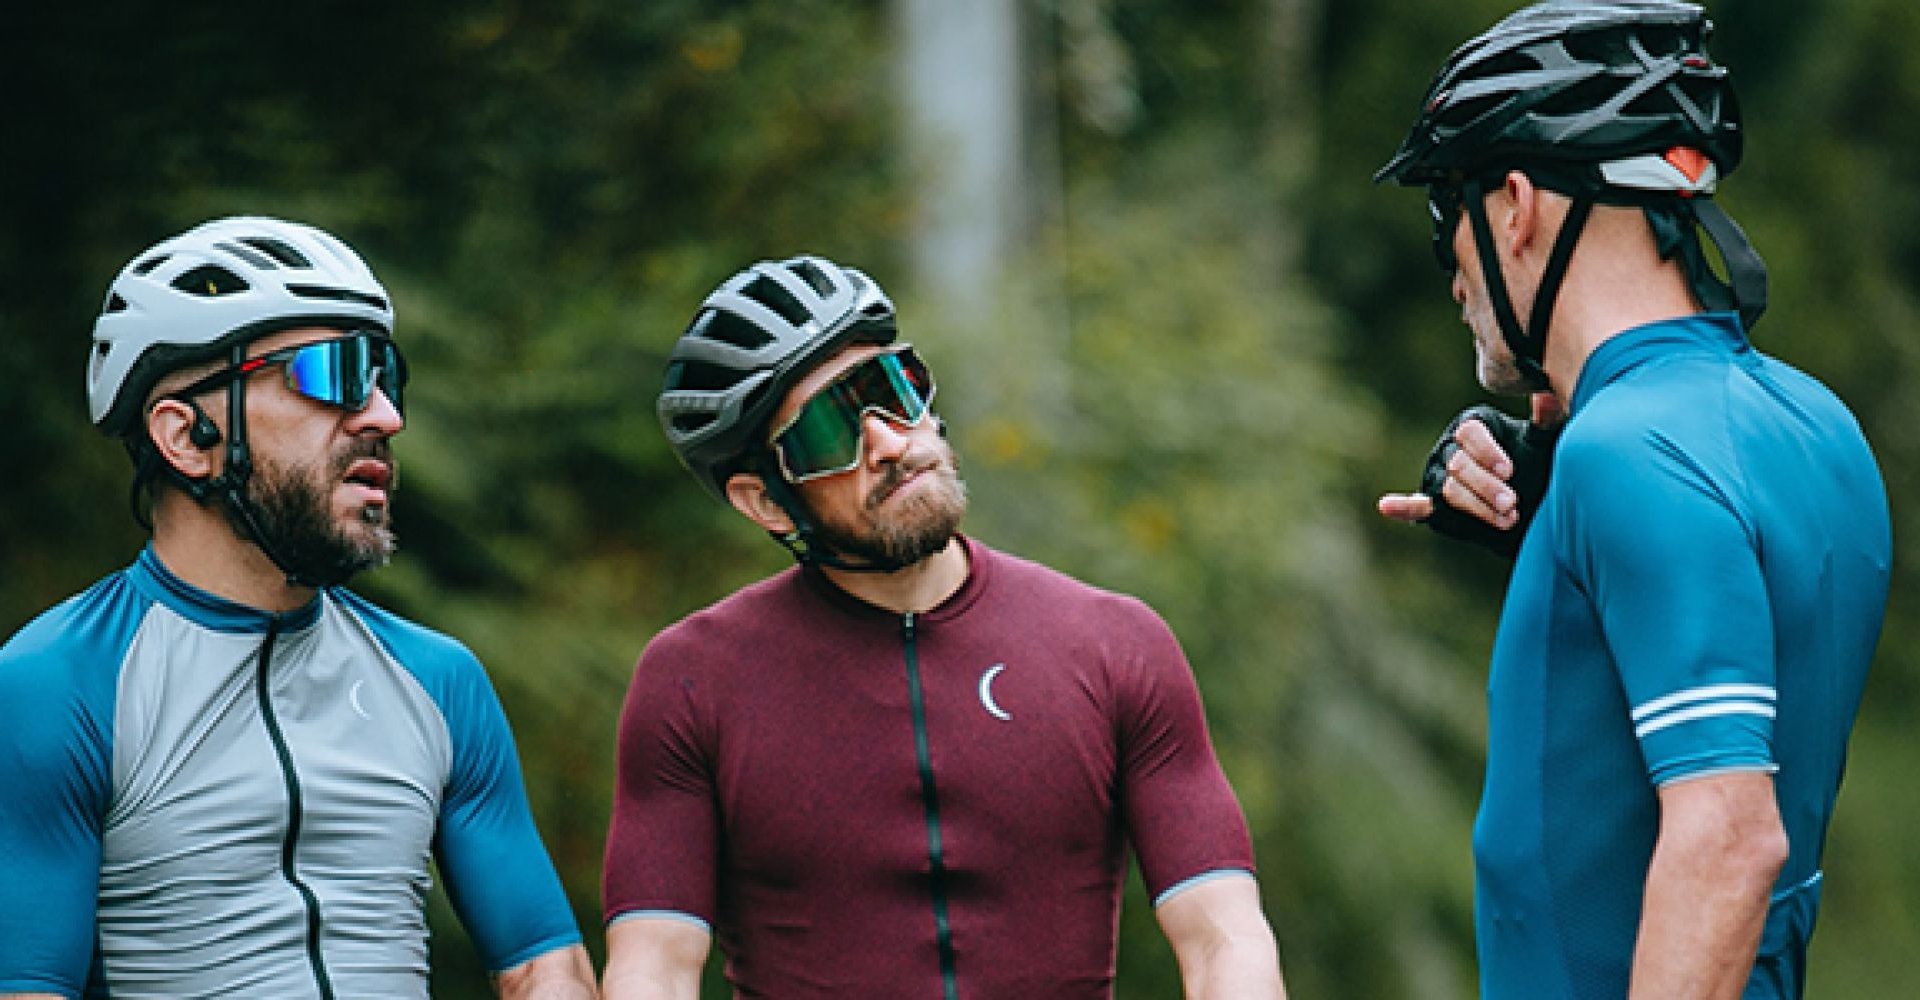 The Best Cycling Sunglasses for Road Cycling in Lanzarote